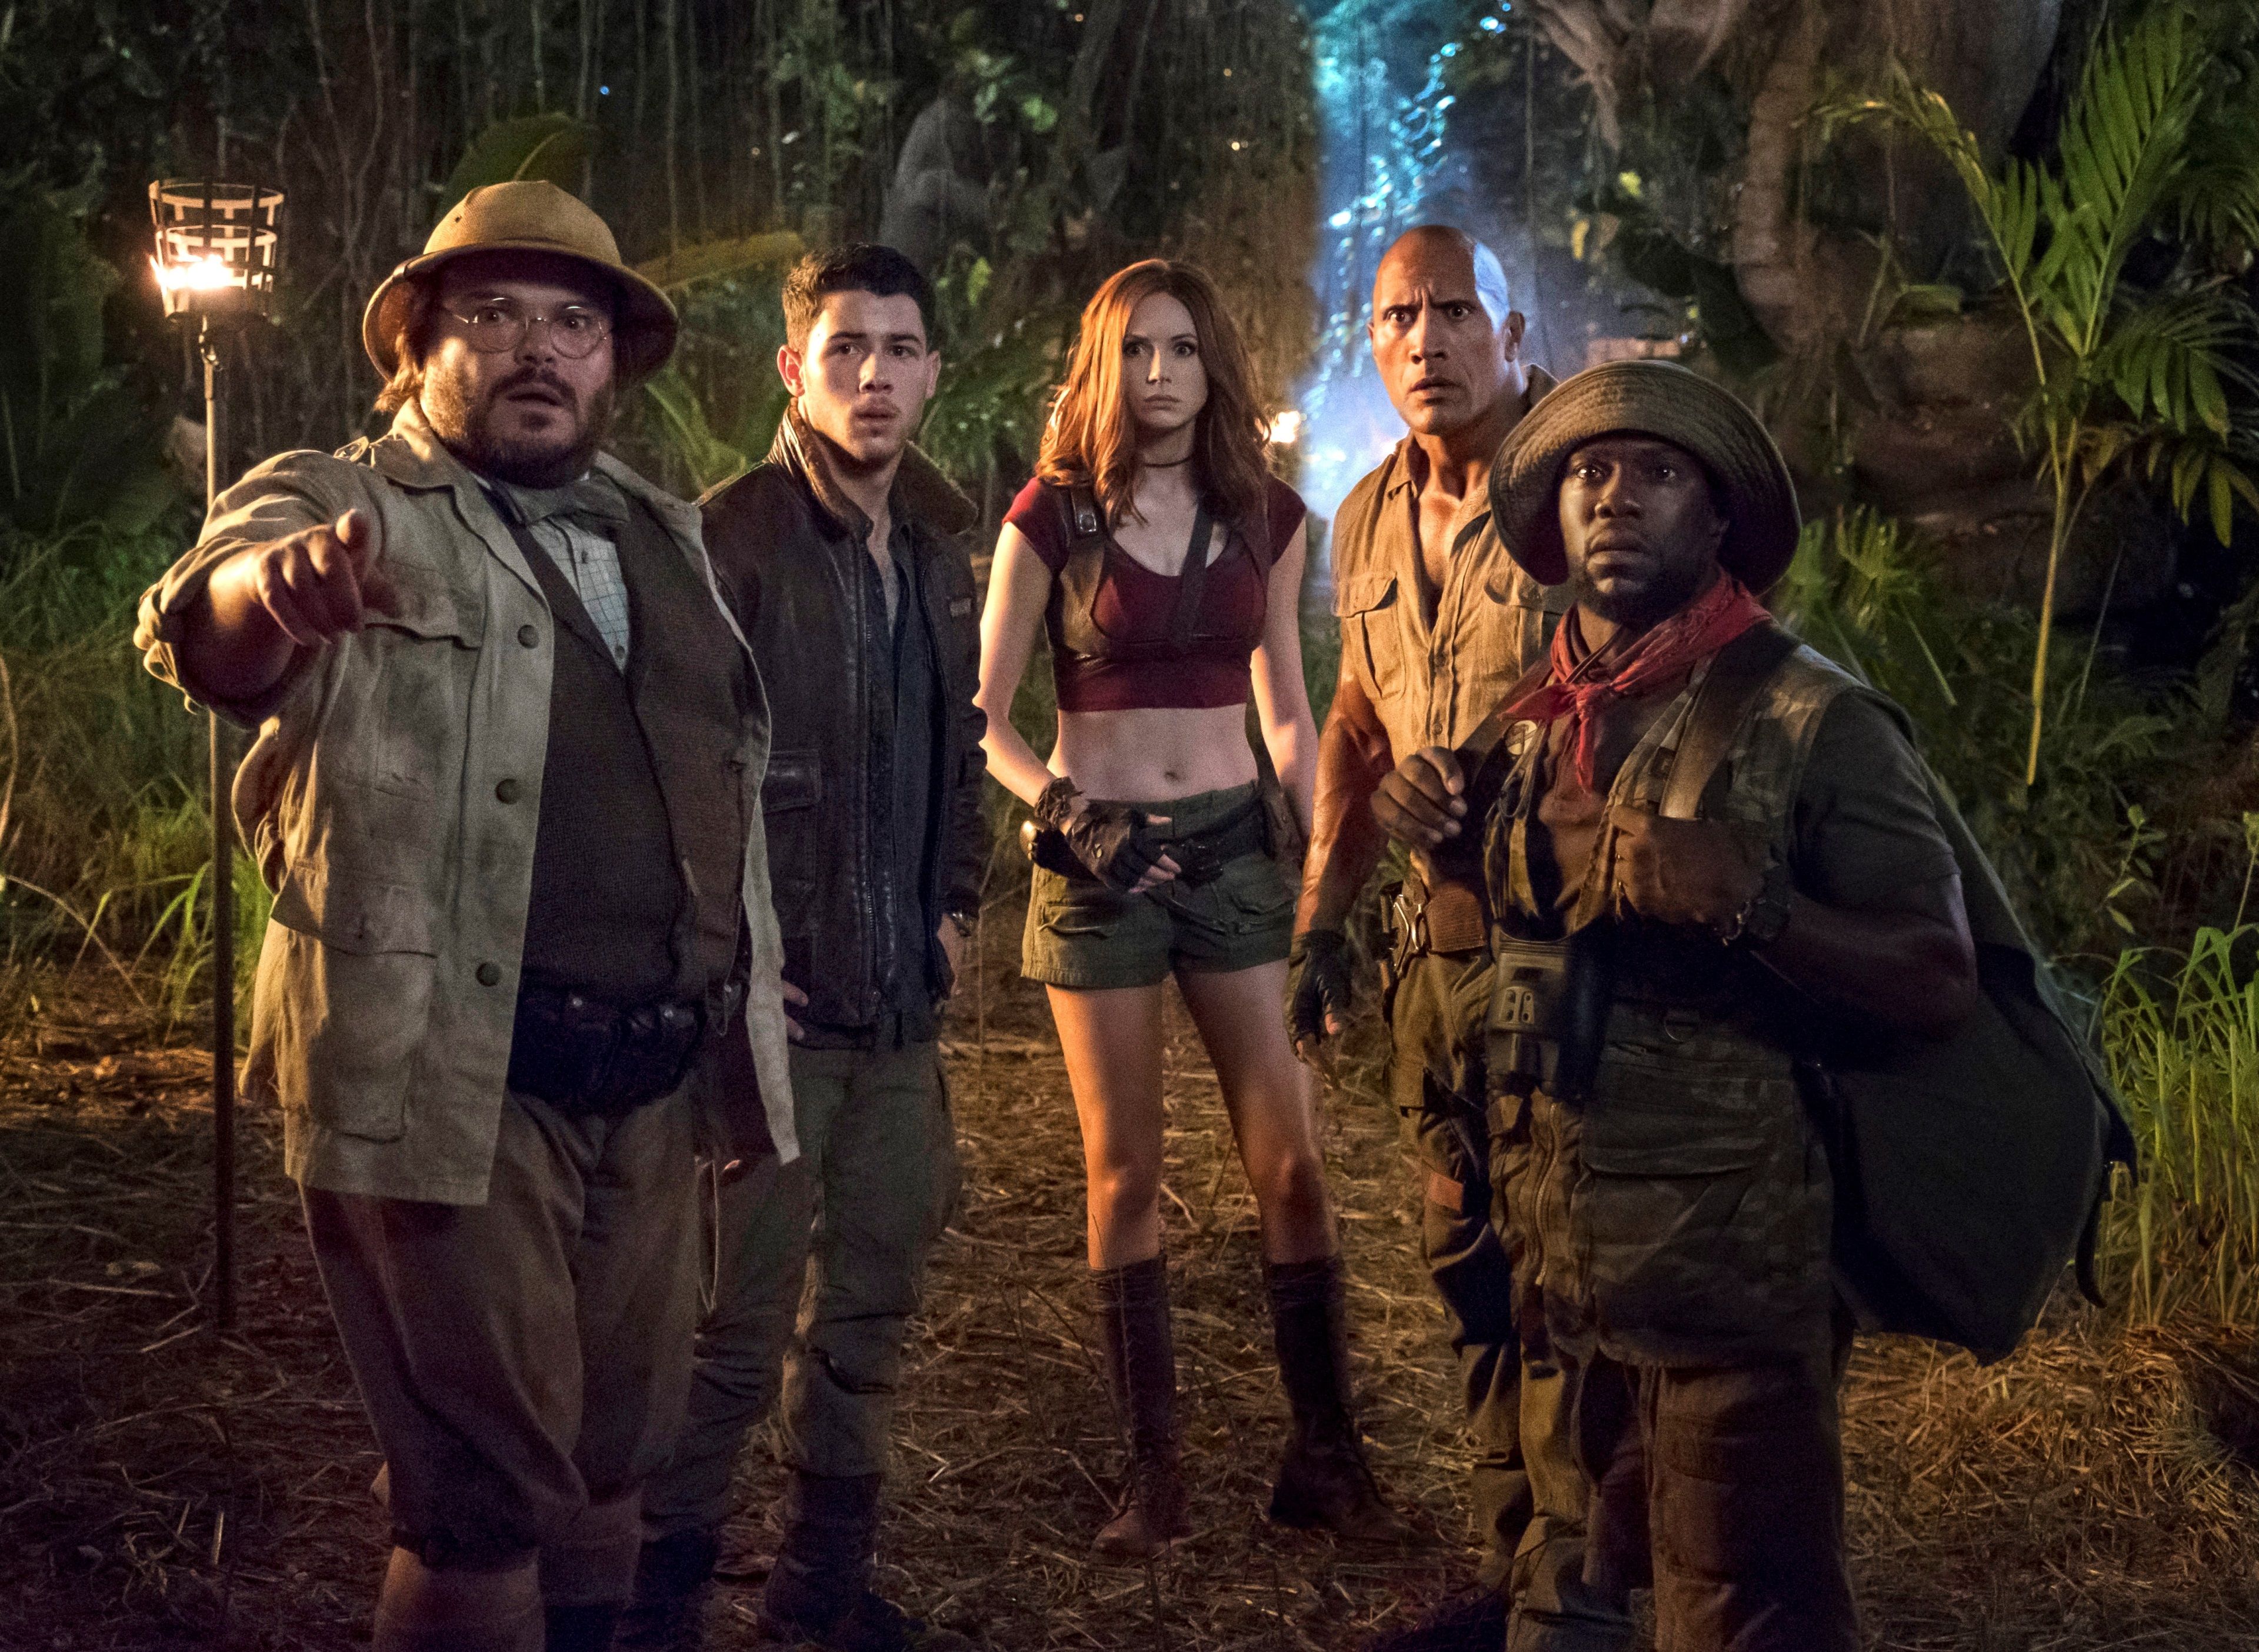 jumanji welcome to the jungle 4k HD image for wallpaper. Welcome to the jungle, New jumanji, Highest grossing movies